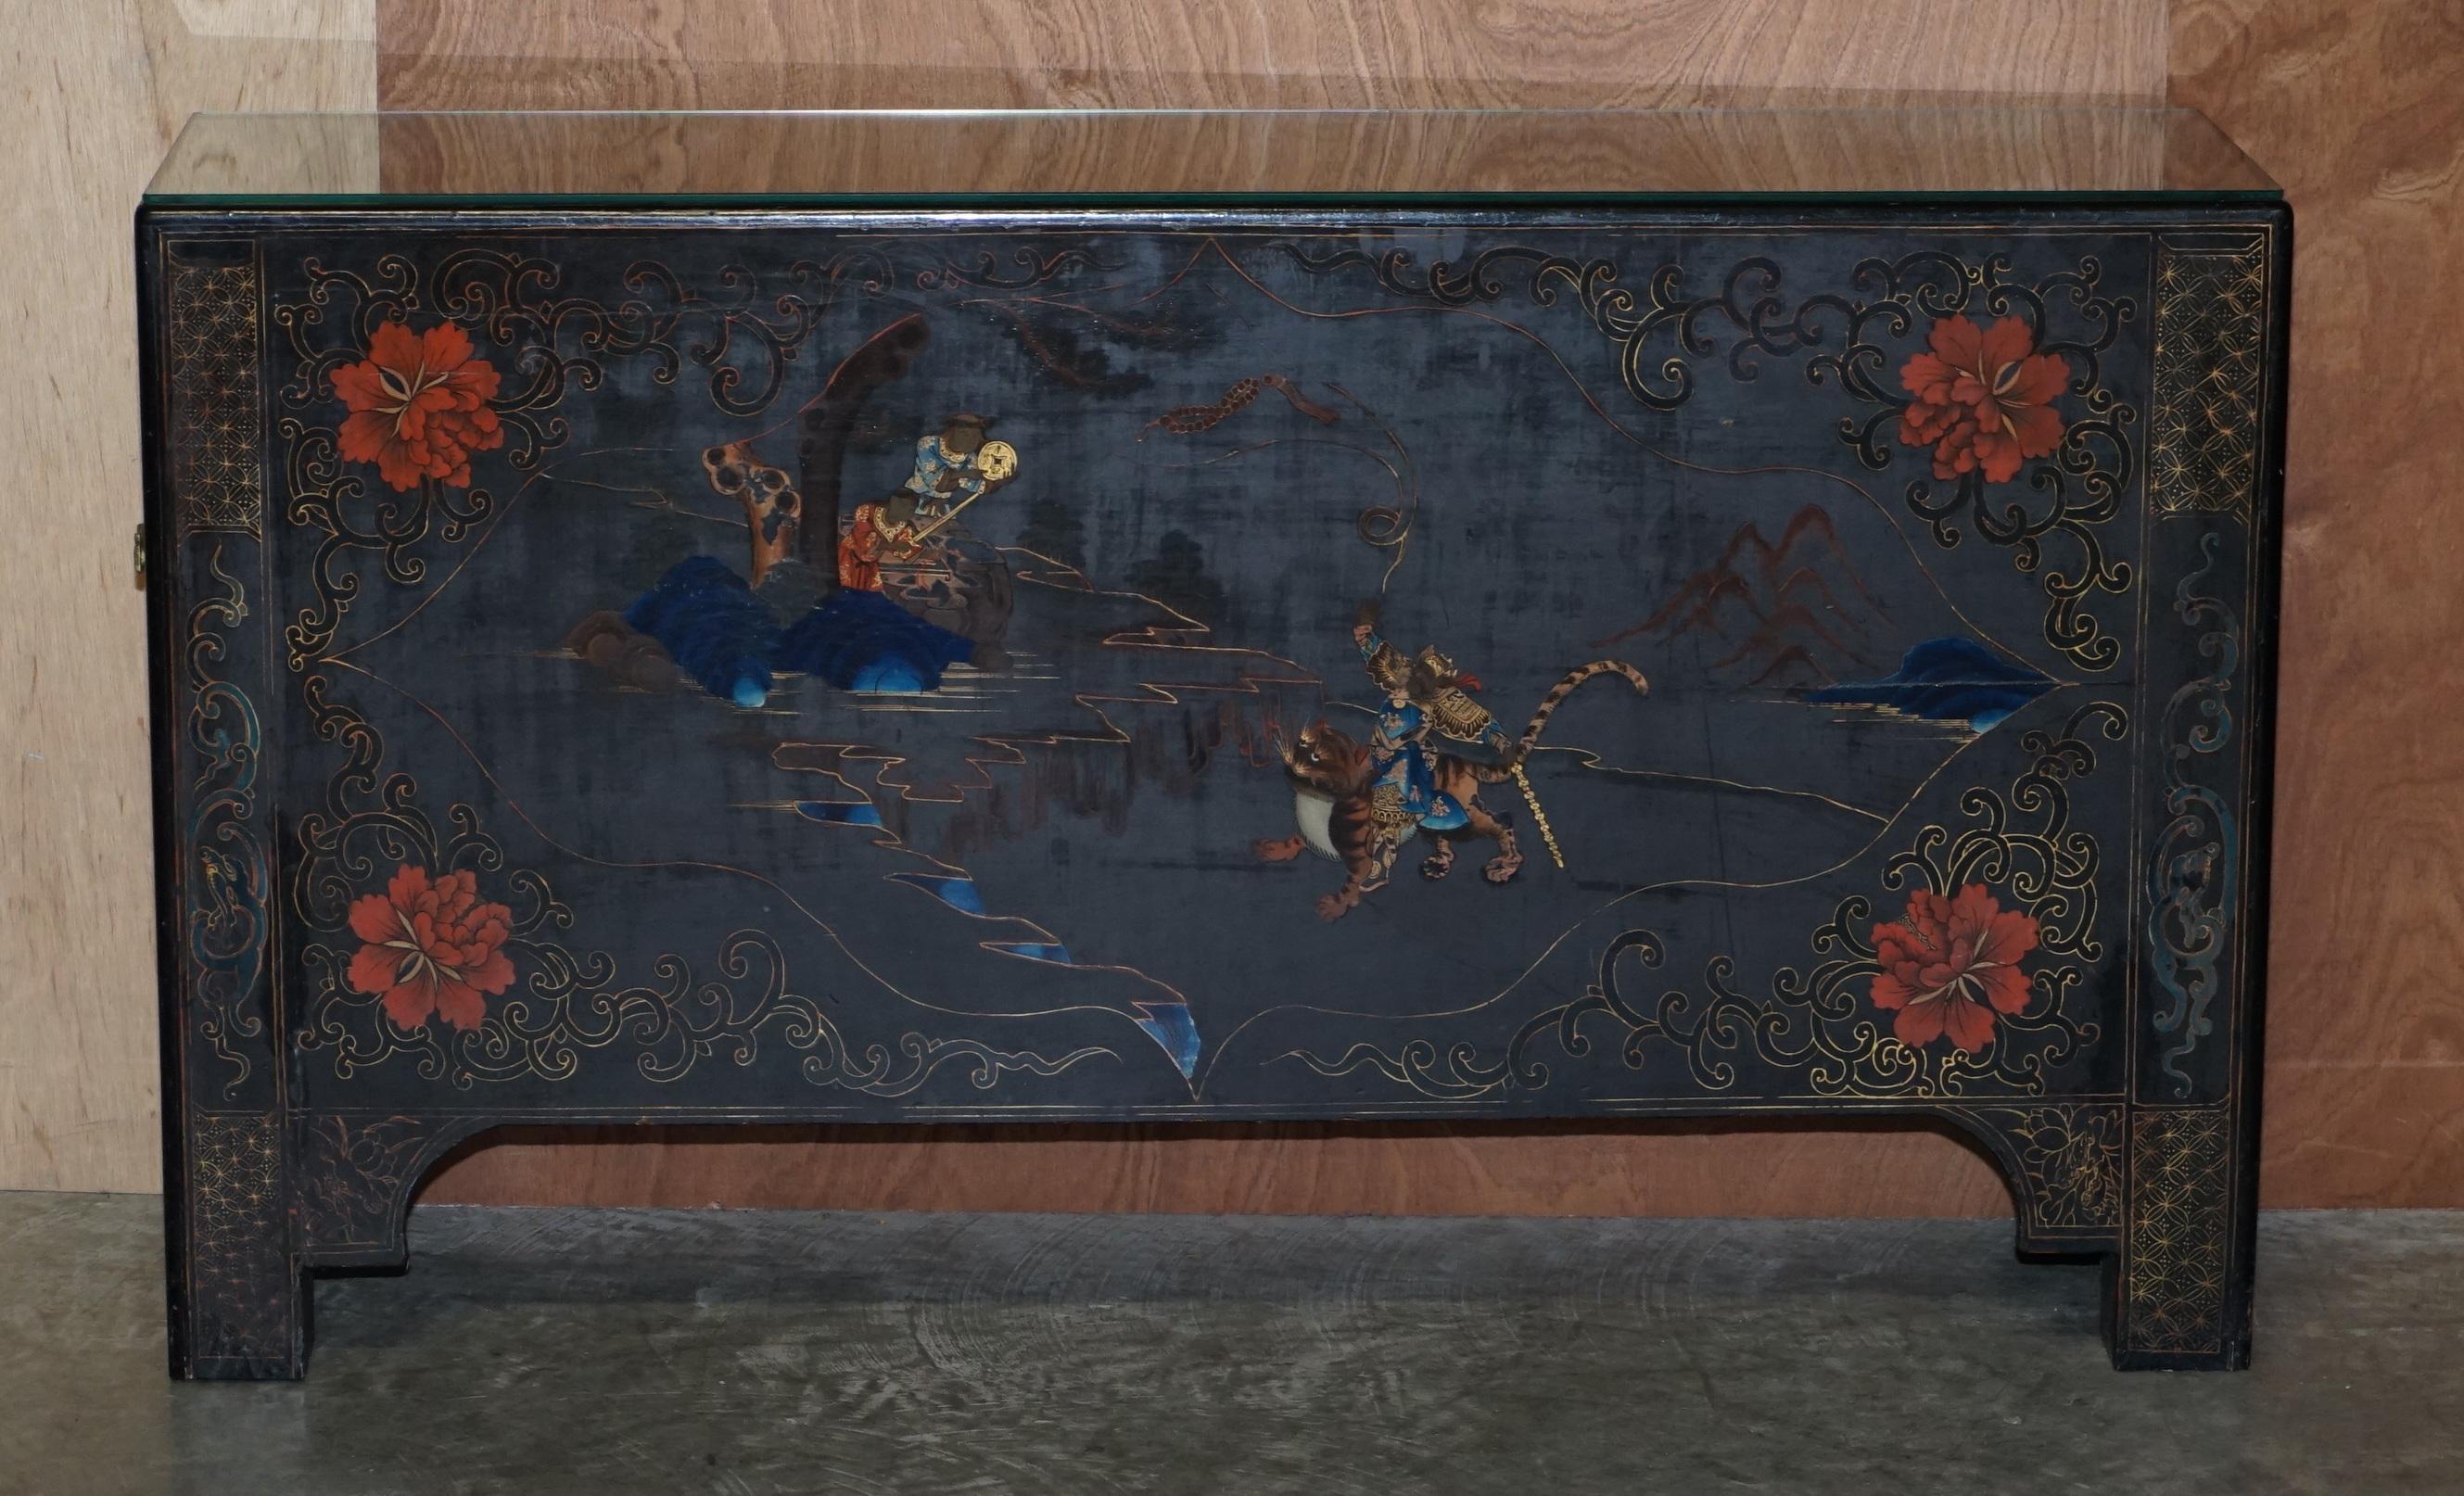 We are delighted to offer this very nicely made, Polychrome painted and lacquered console sideboard

This is a very good-looking and decorative piece, you have a god like warrior chap riding a tiger in the mountains with some onlookers who are